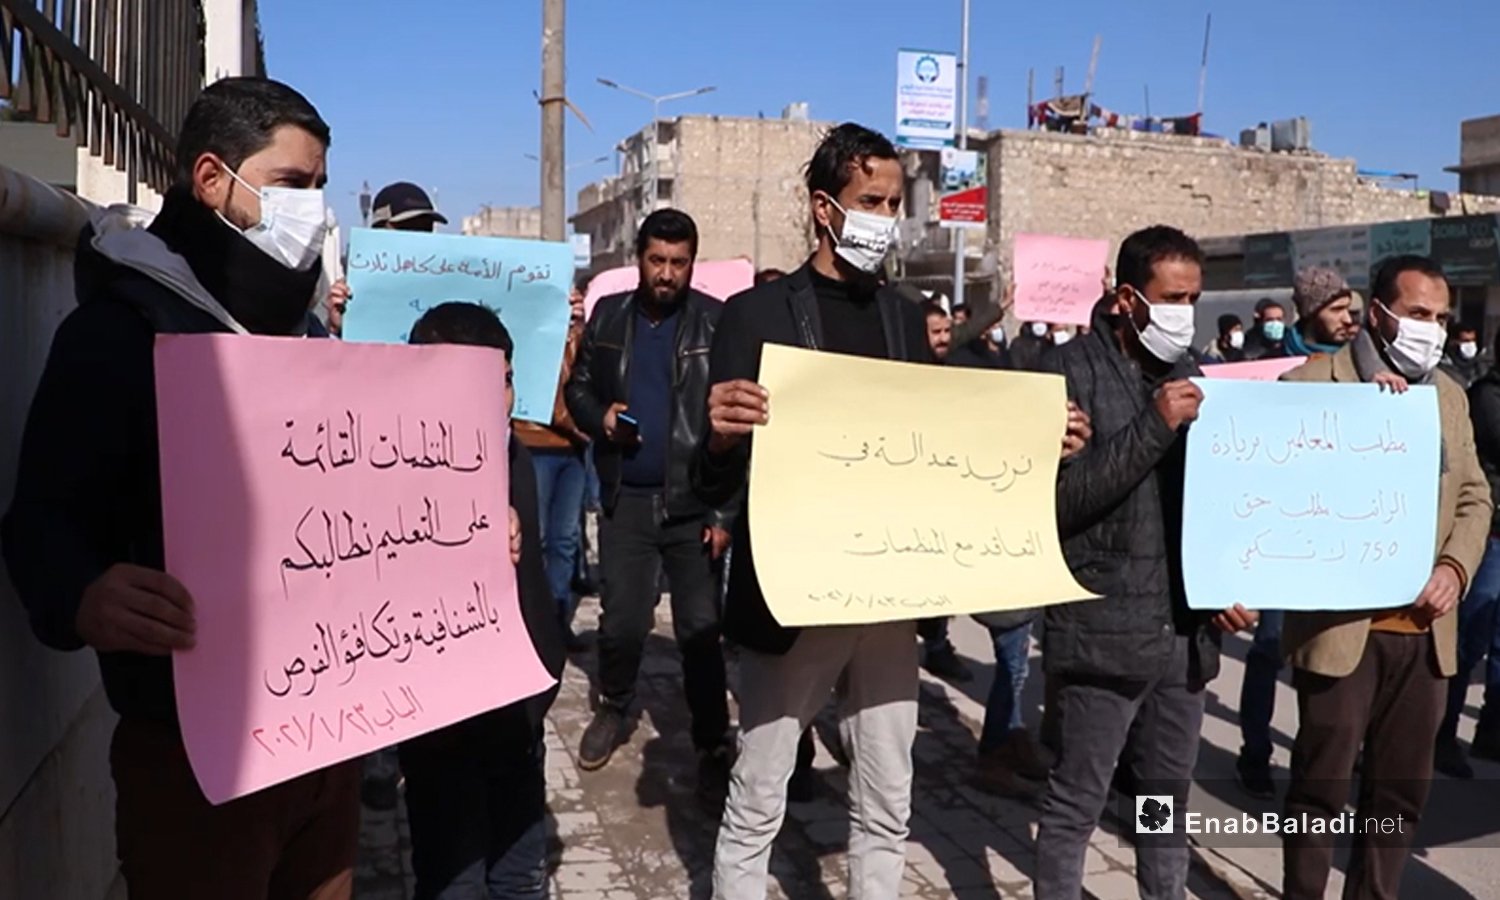 Teachers stand in a protest, demanding an increase in their salaries in the city of al-Bab - 23 January 2021 (Enab Baladi / Asim Melhem)